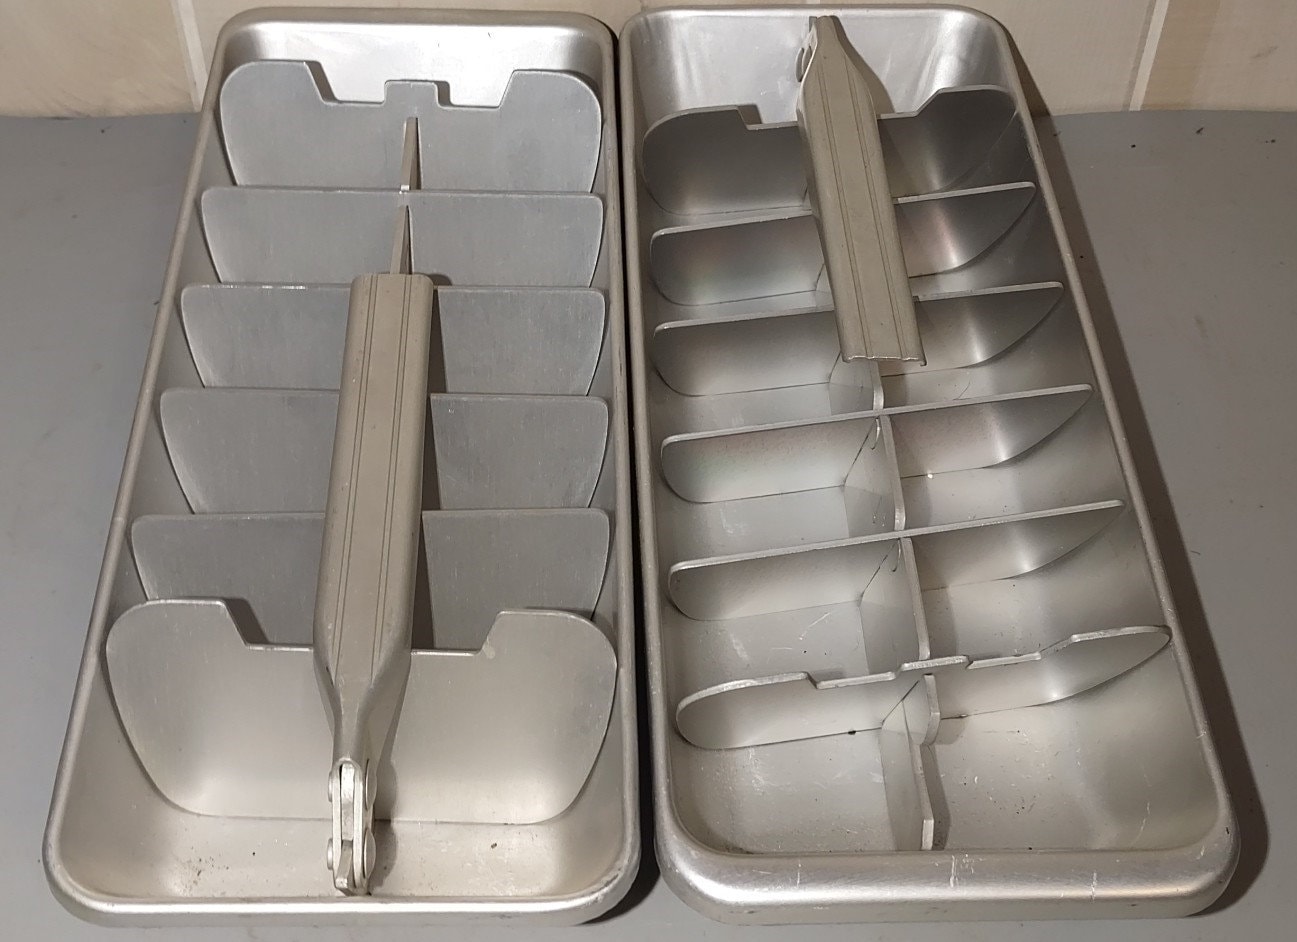 Vintage Aluminum Metal Ice Cube Tray Frigidaire With 20 Compartments for Ice  or Organizer 